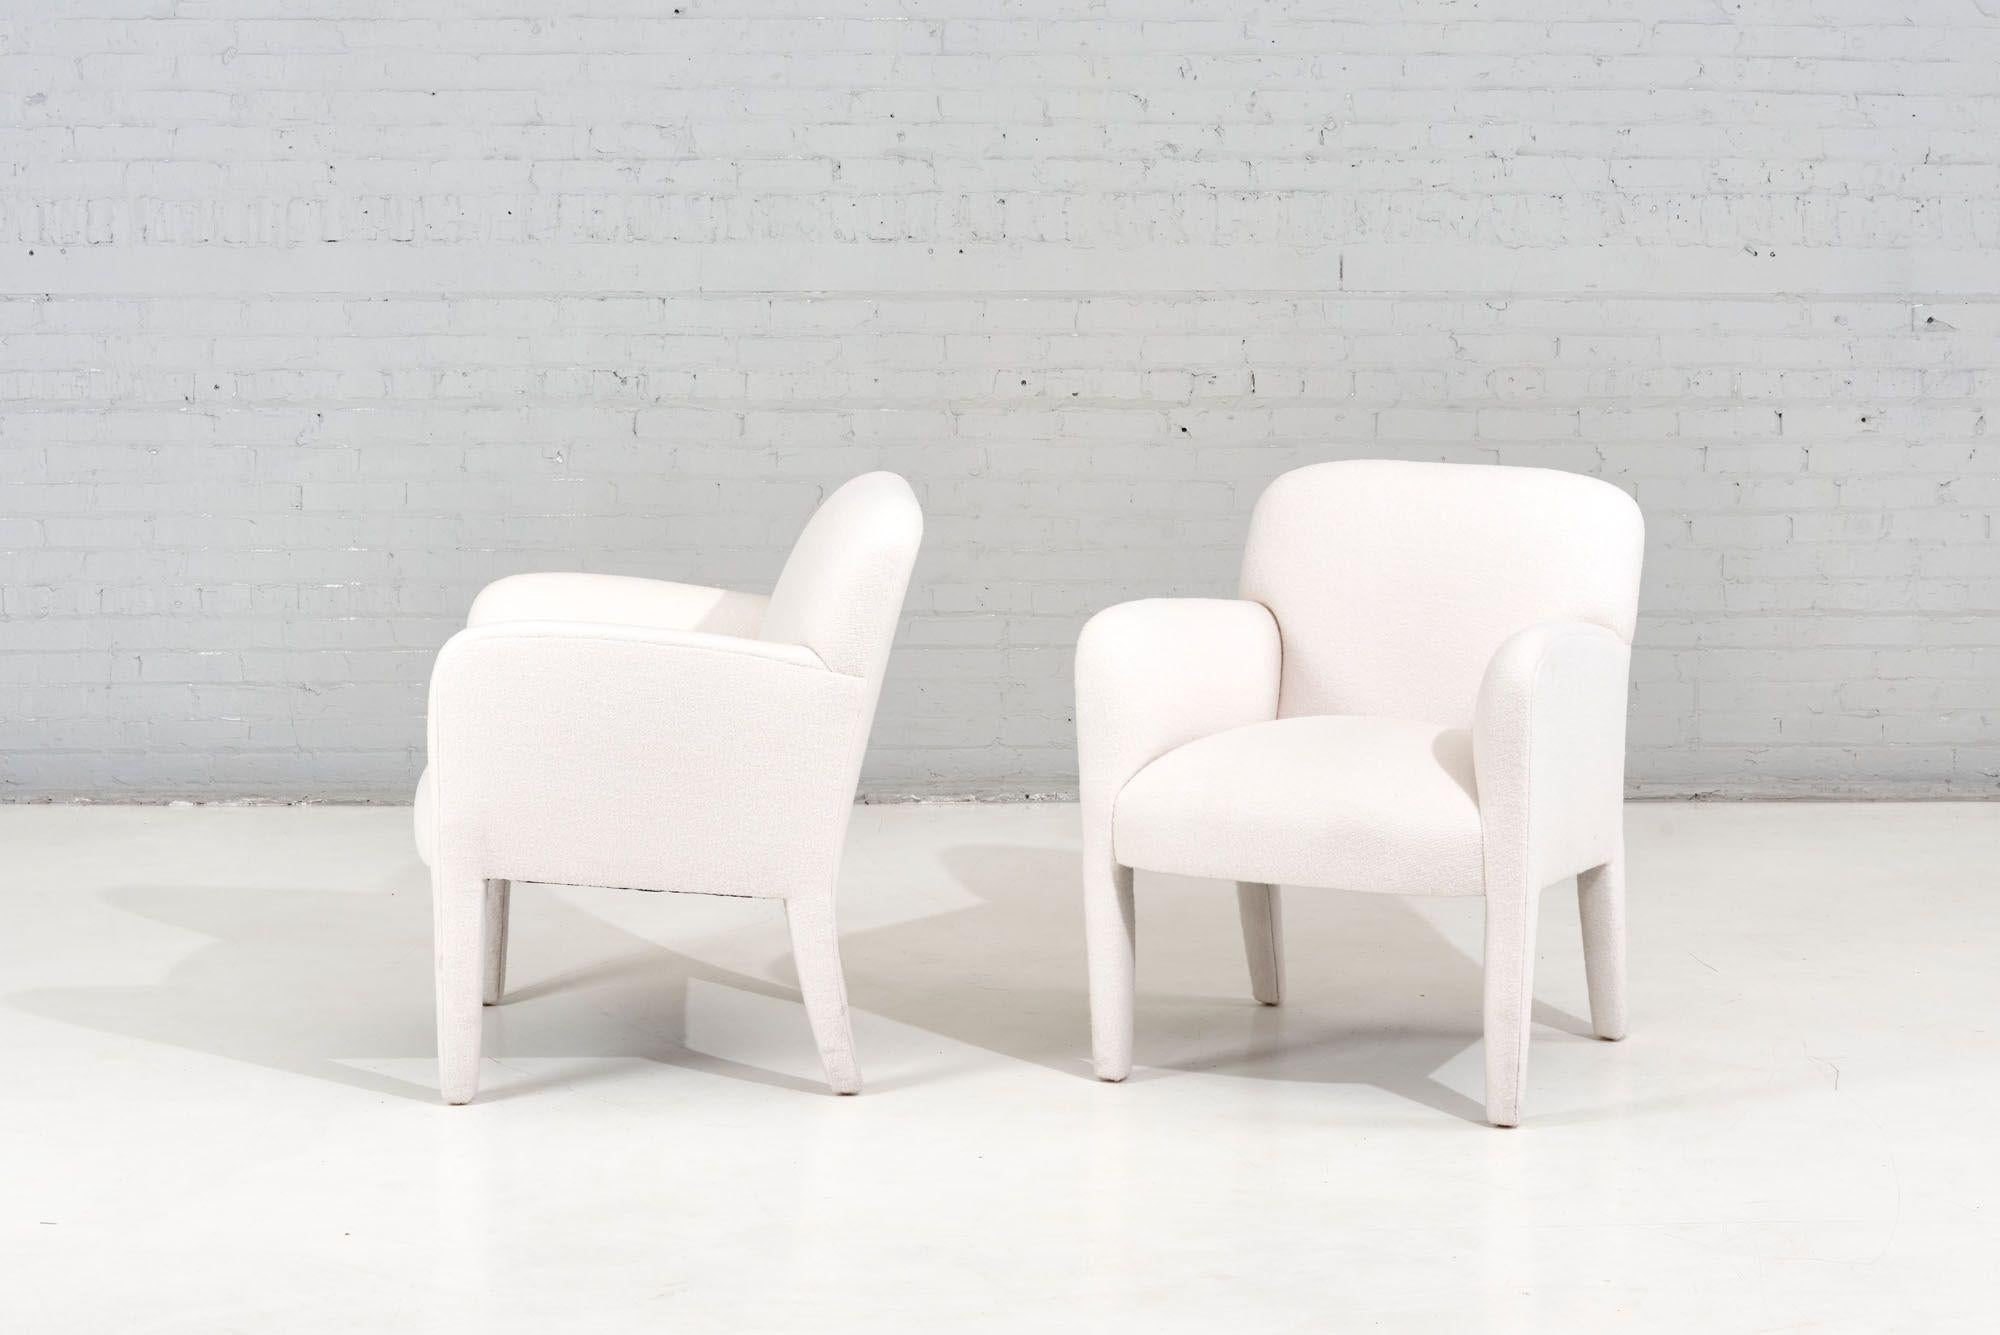 Post Modern Pair Lounge Chairs by Preview in Boucle, 1980 Fully restored and reupholstered in white boucle.

